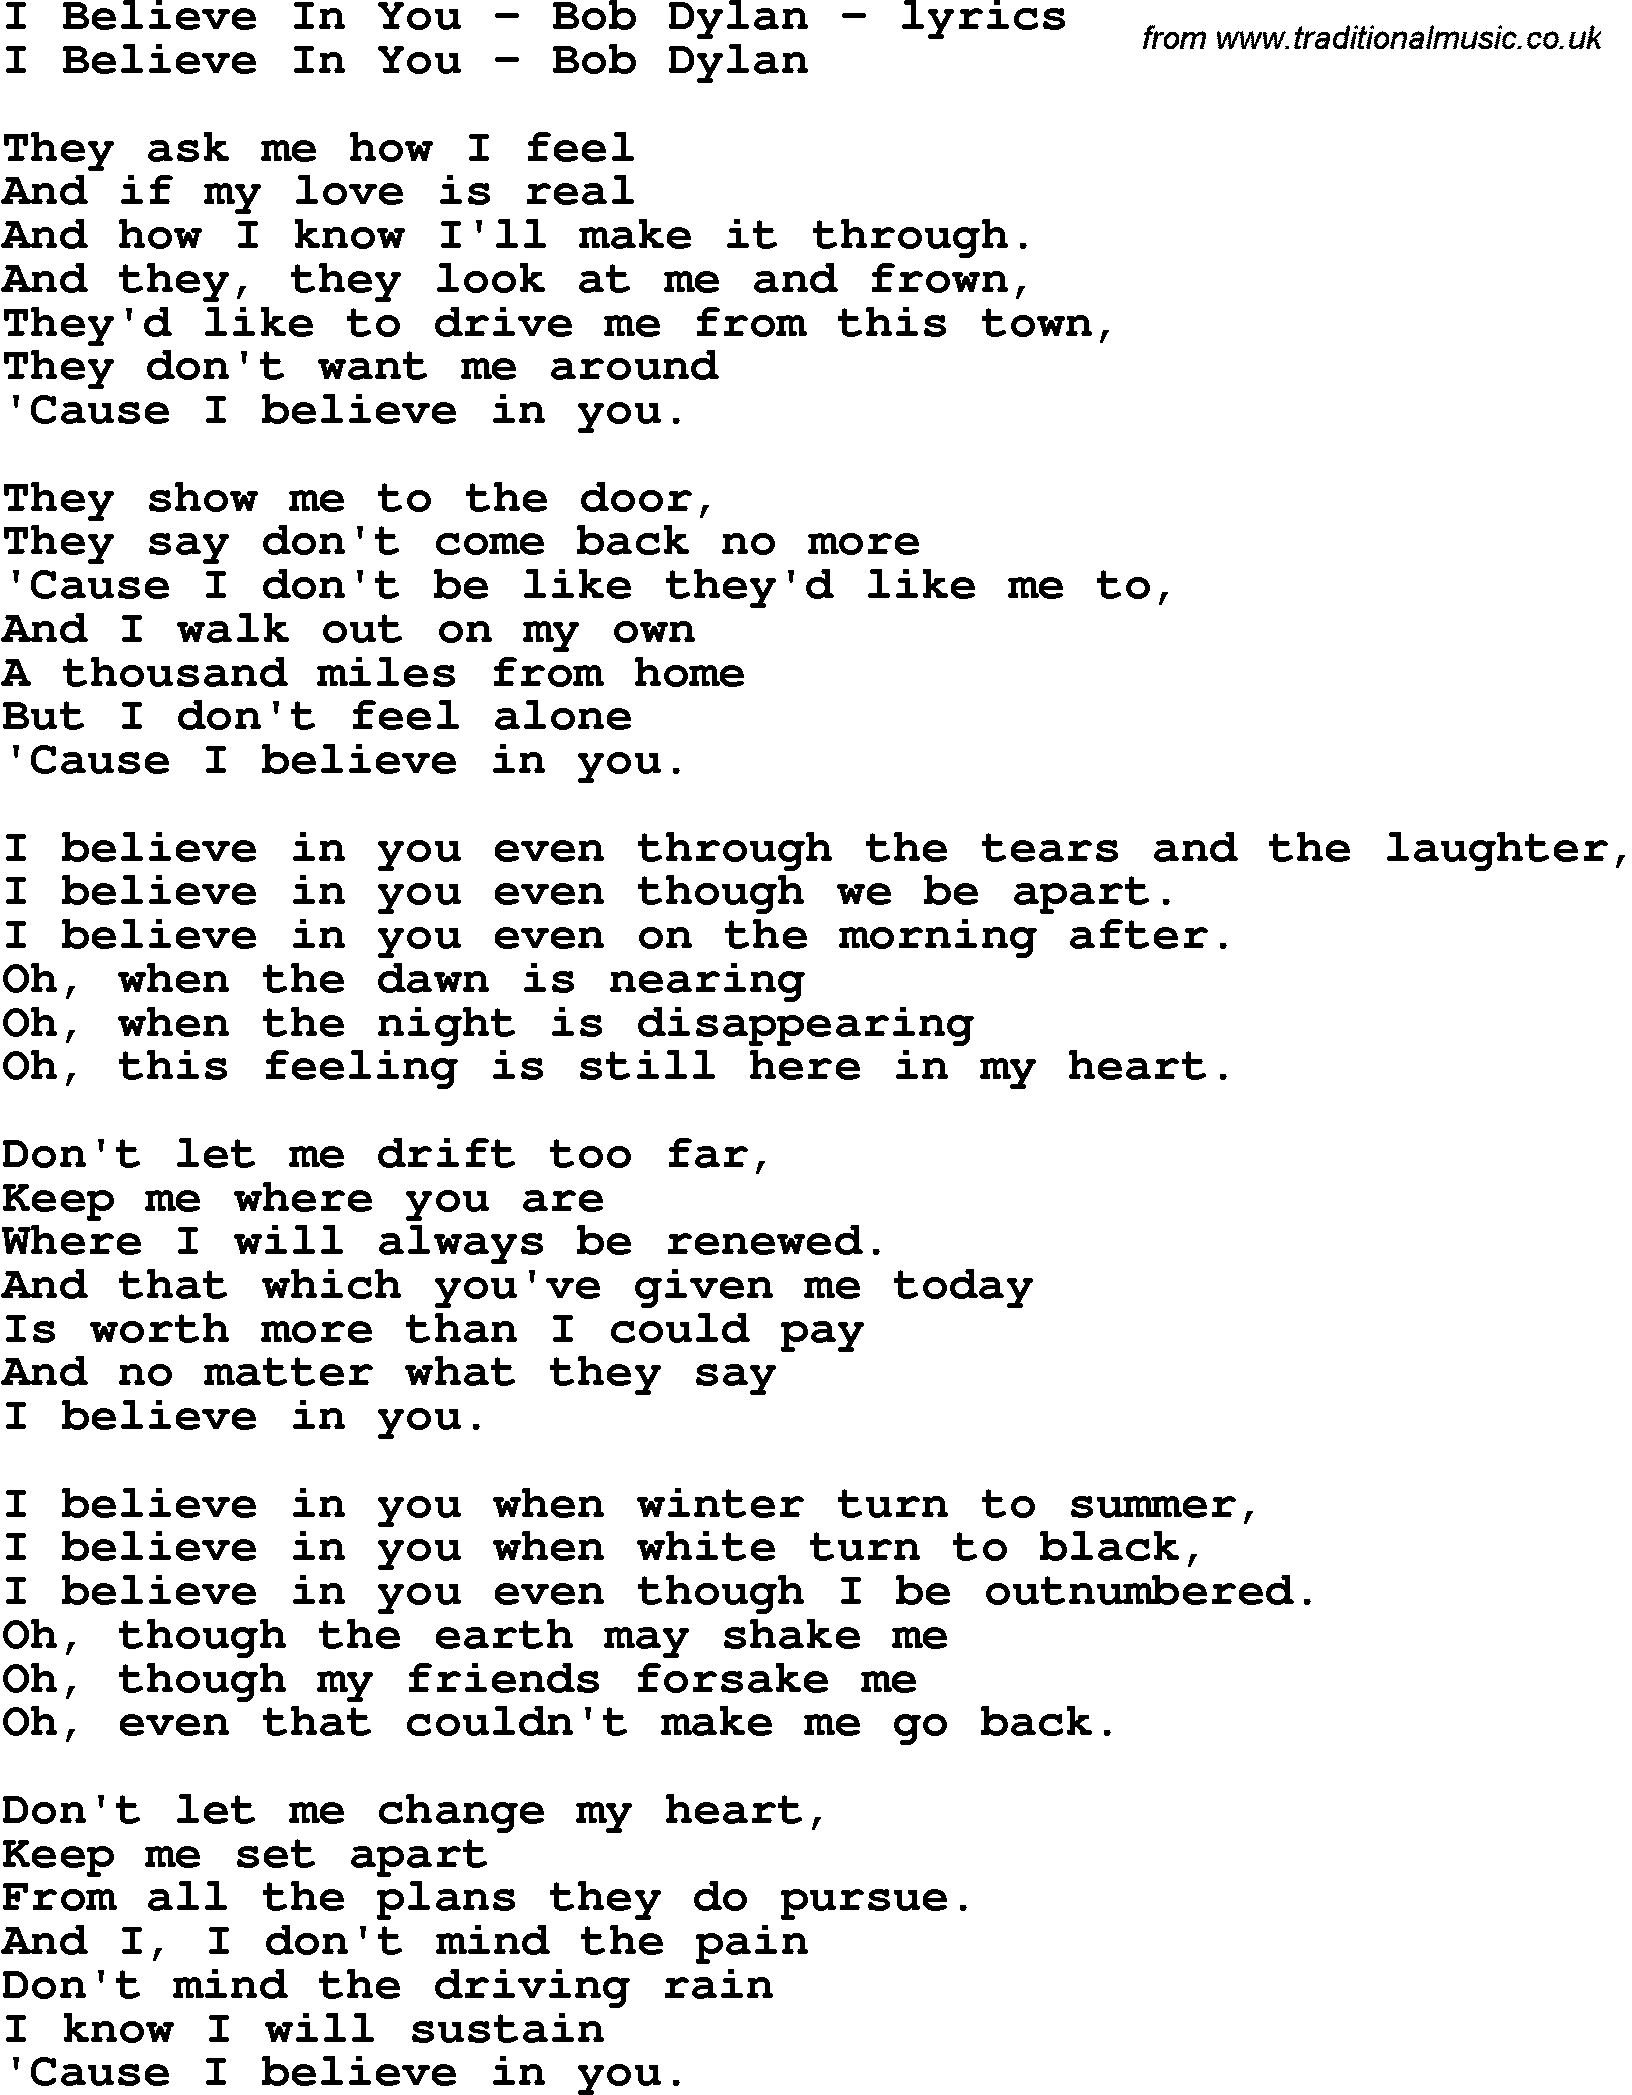 Love Song Lyrics for: I Believe In You - Bob Dylan